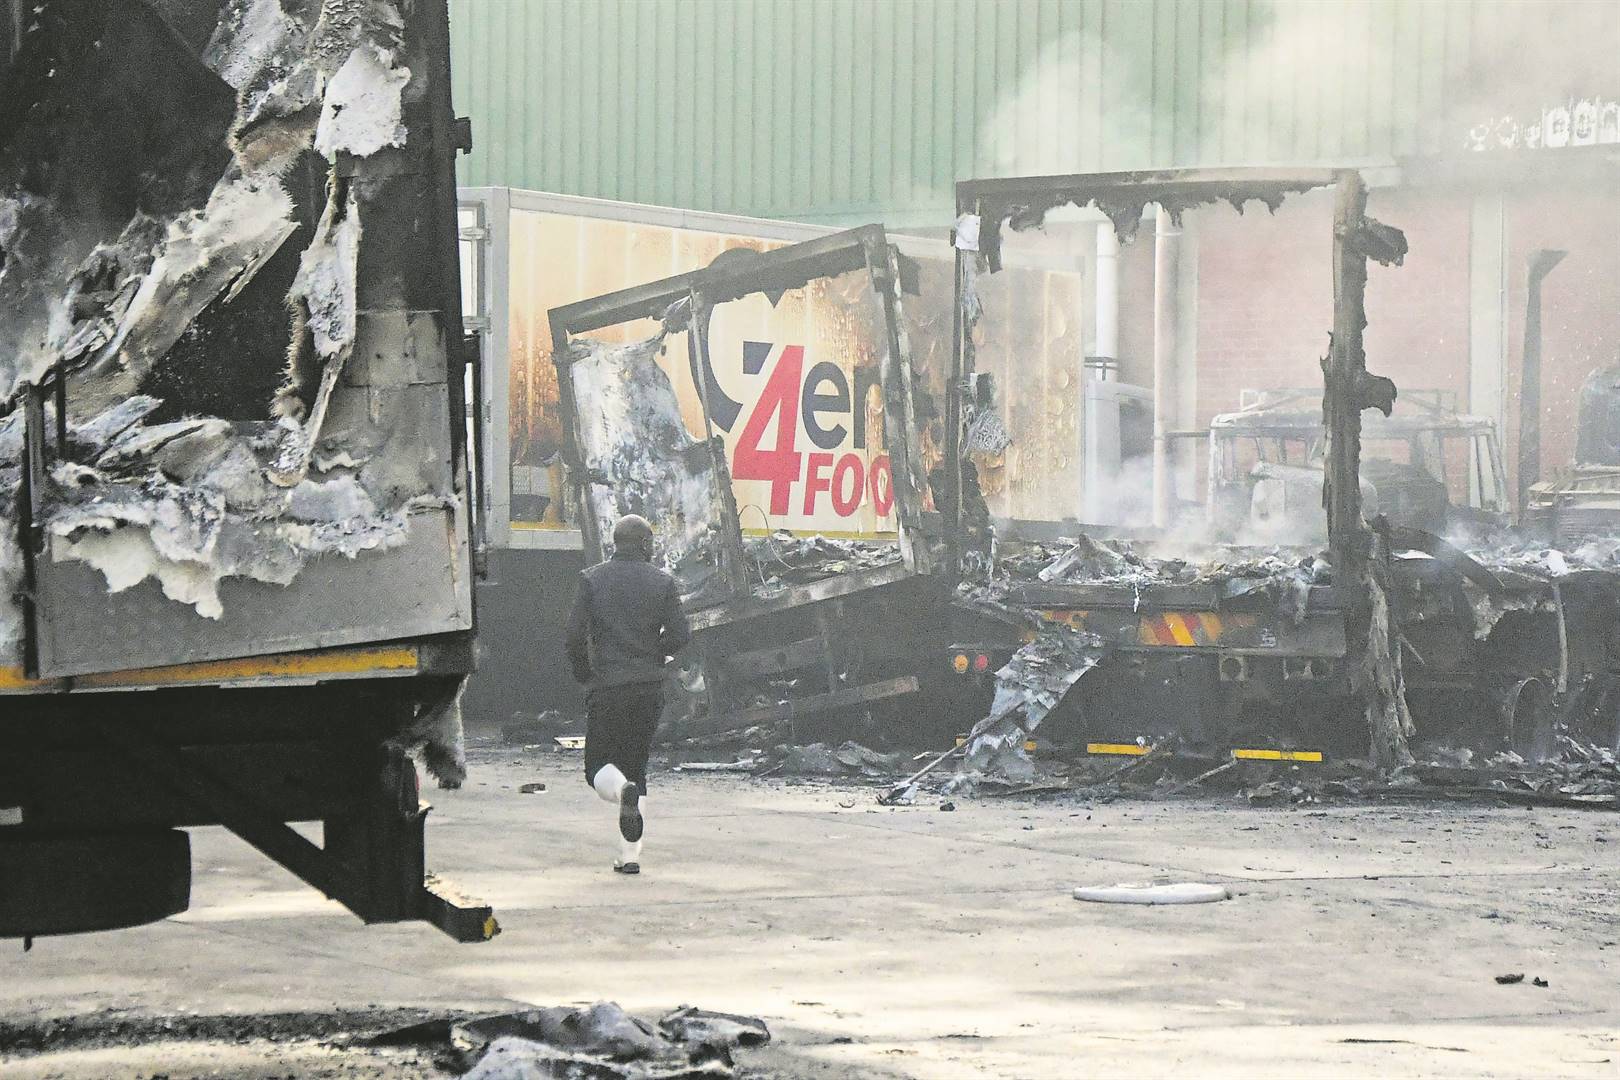 HamstrungTrucks that were burnt in a depot in the Sea Cow Lake area during the riots in July last year.A considerable number of shops and businesses were looted and/or torched across the country during the wave of violent protests that followed the incarceration offormer president Jacob Zuma. Photo: Darren stewart / gallo images